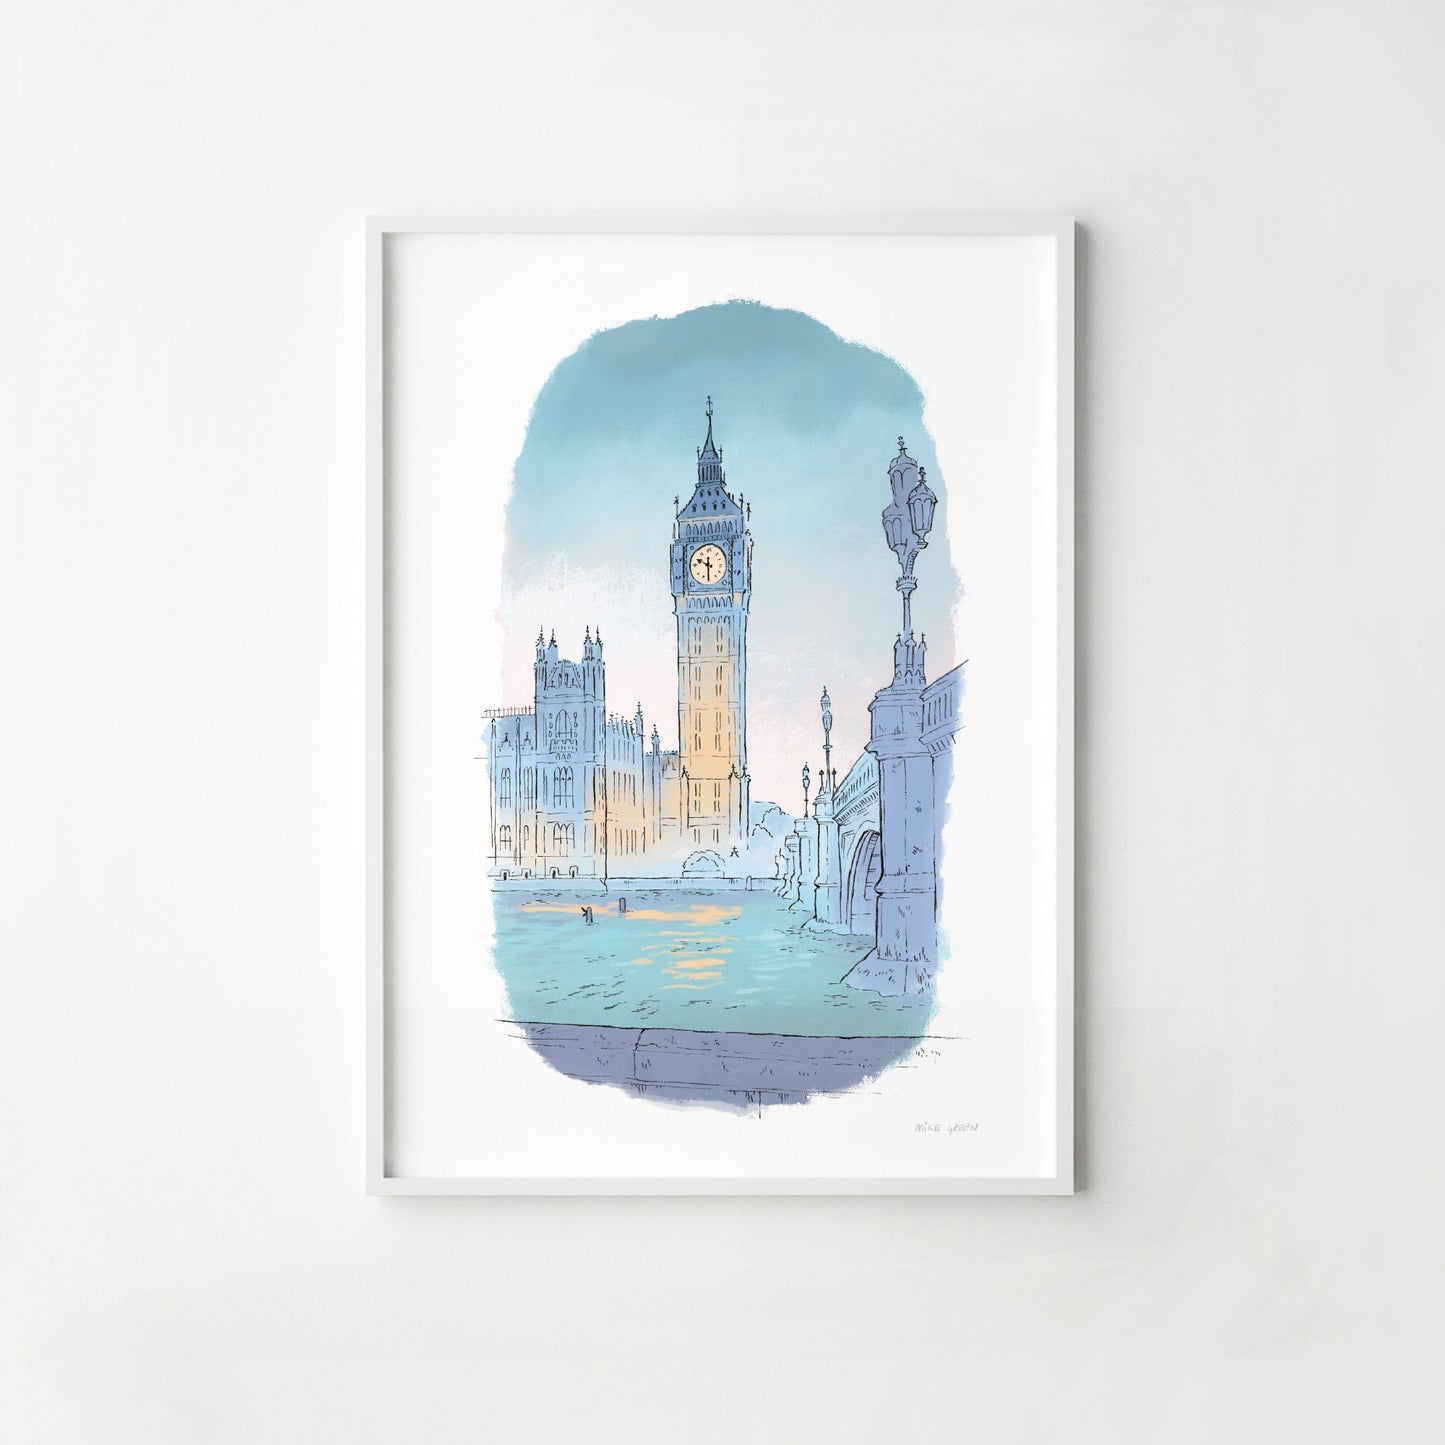 A print of London's big ben at twilight beautifully illustrated by mike green illustration.